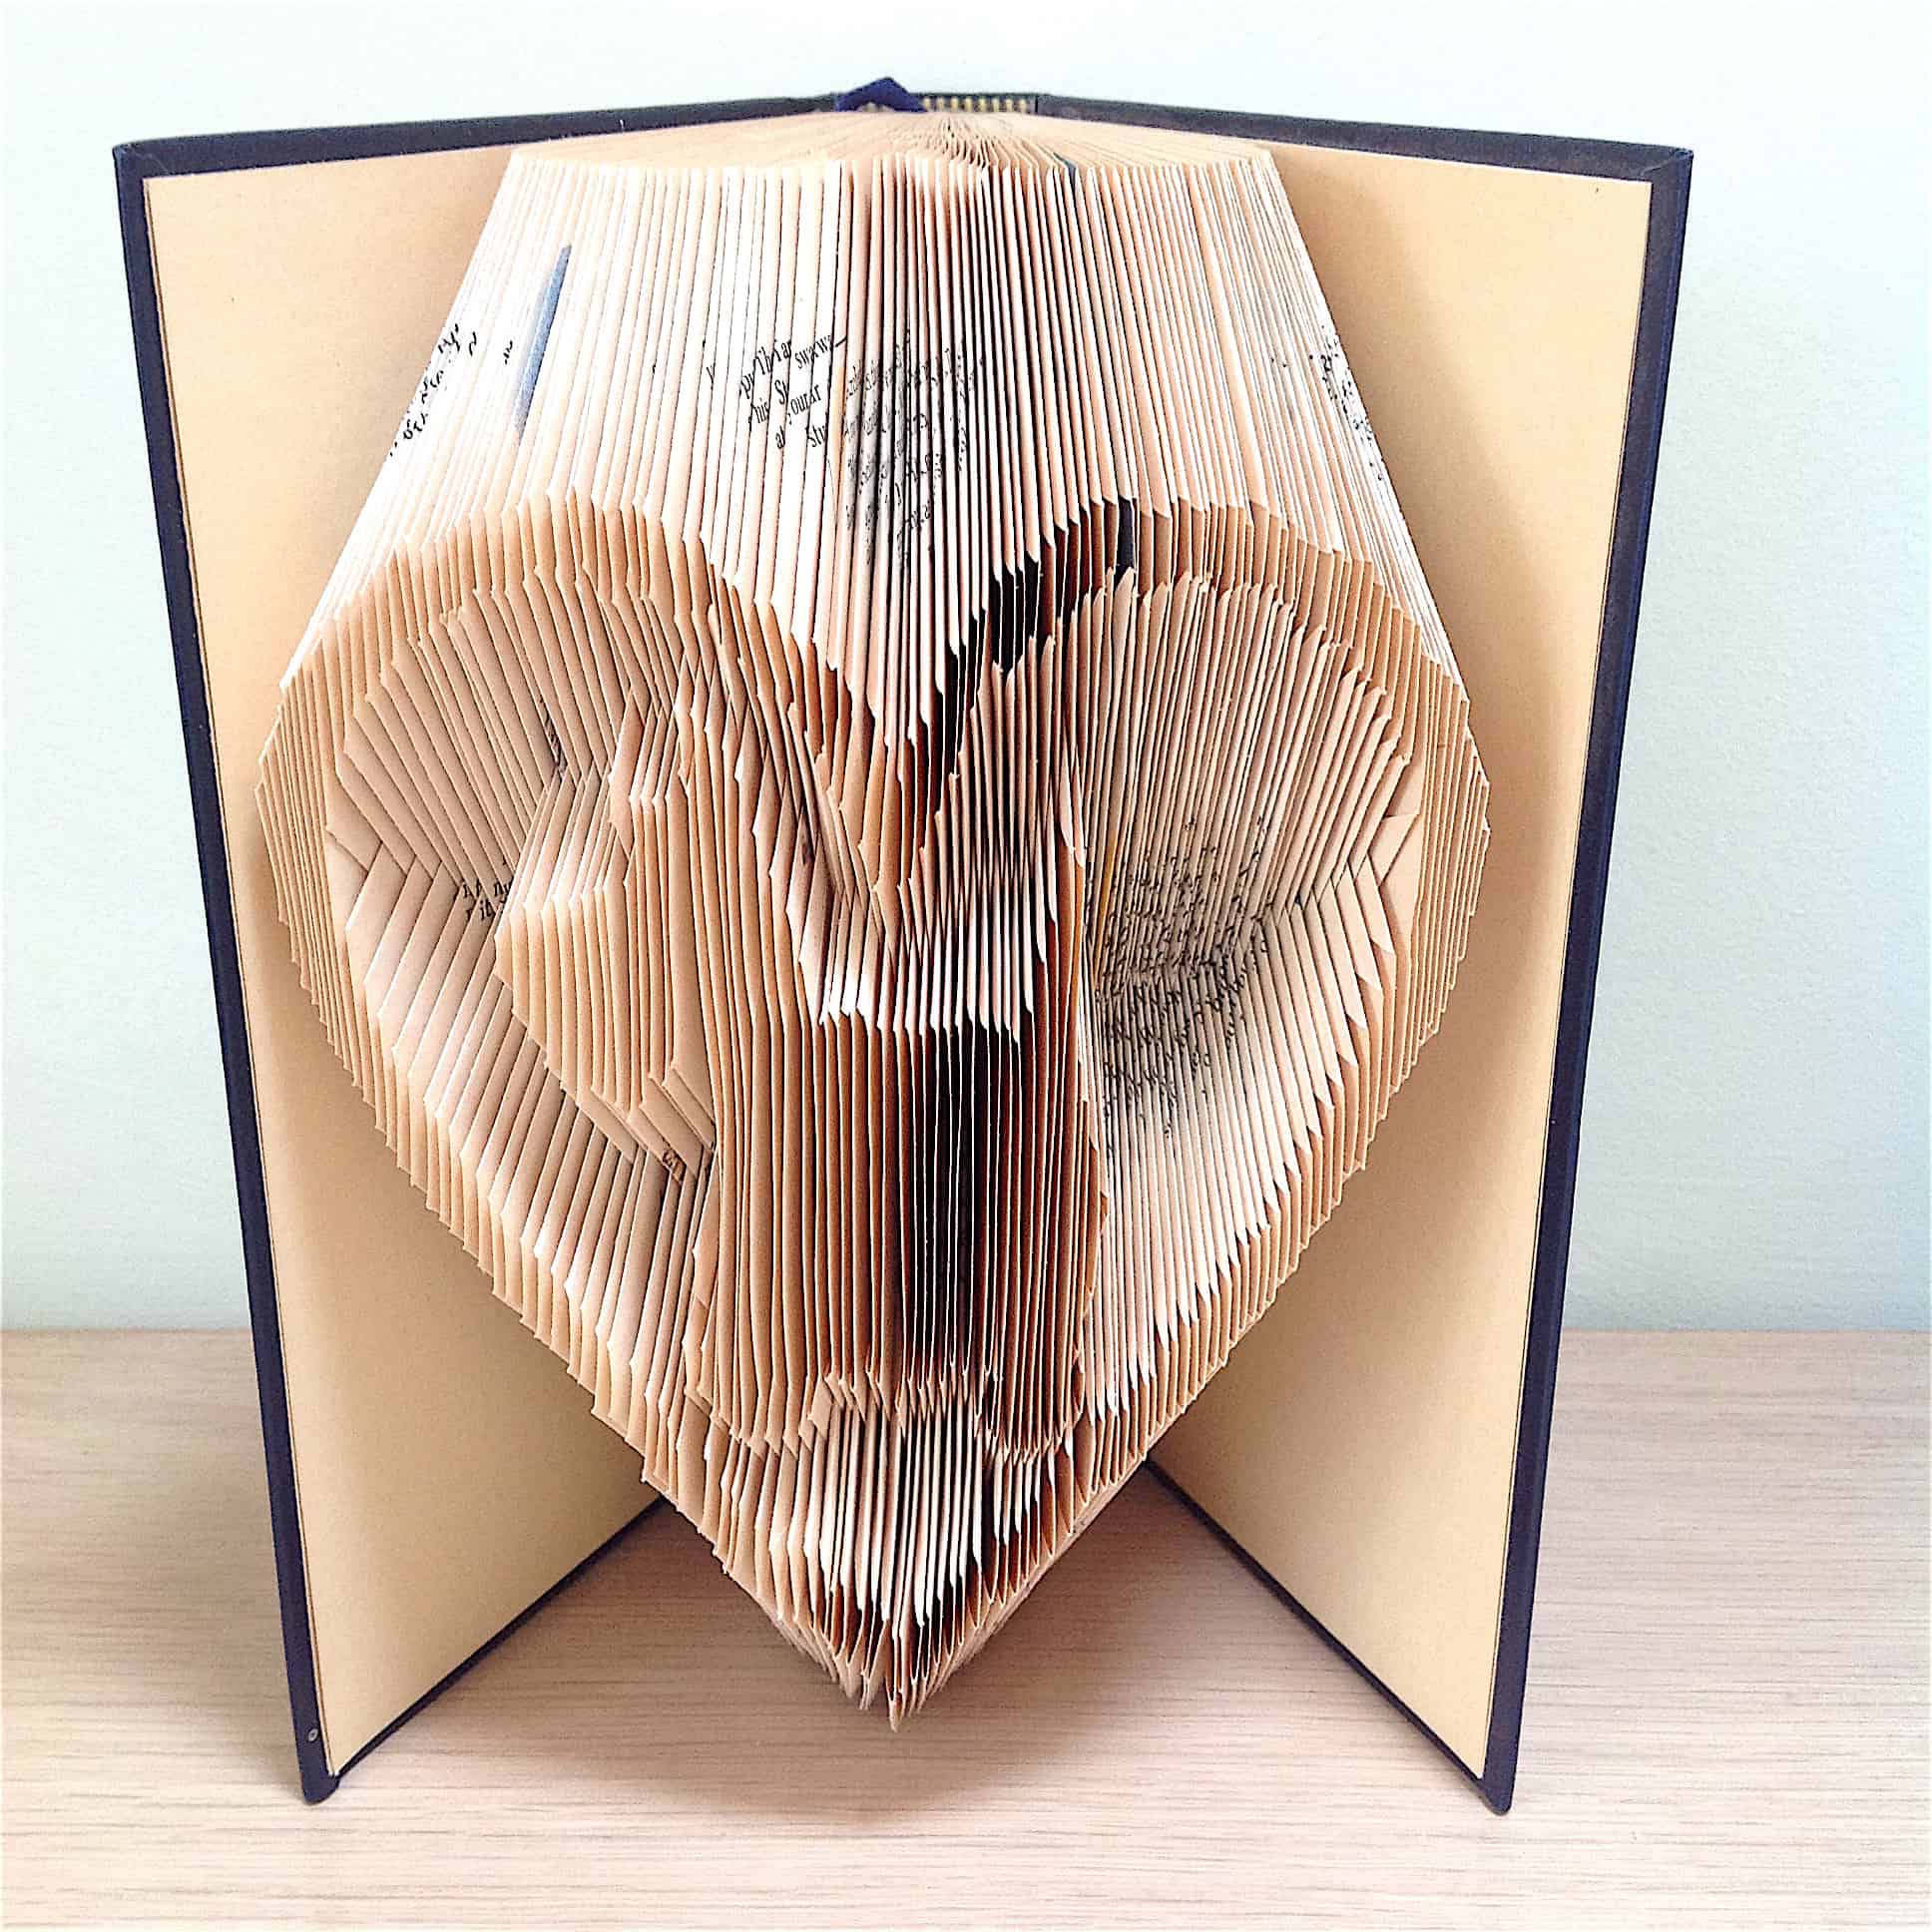 Book folding PATTERNS Create your own folded book art~Dogs